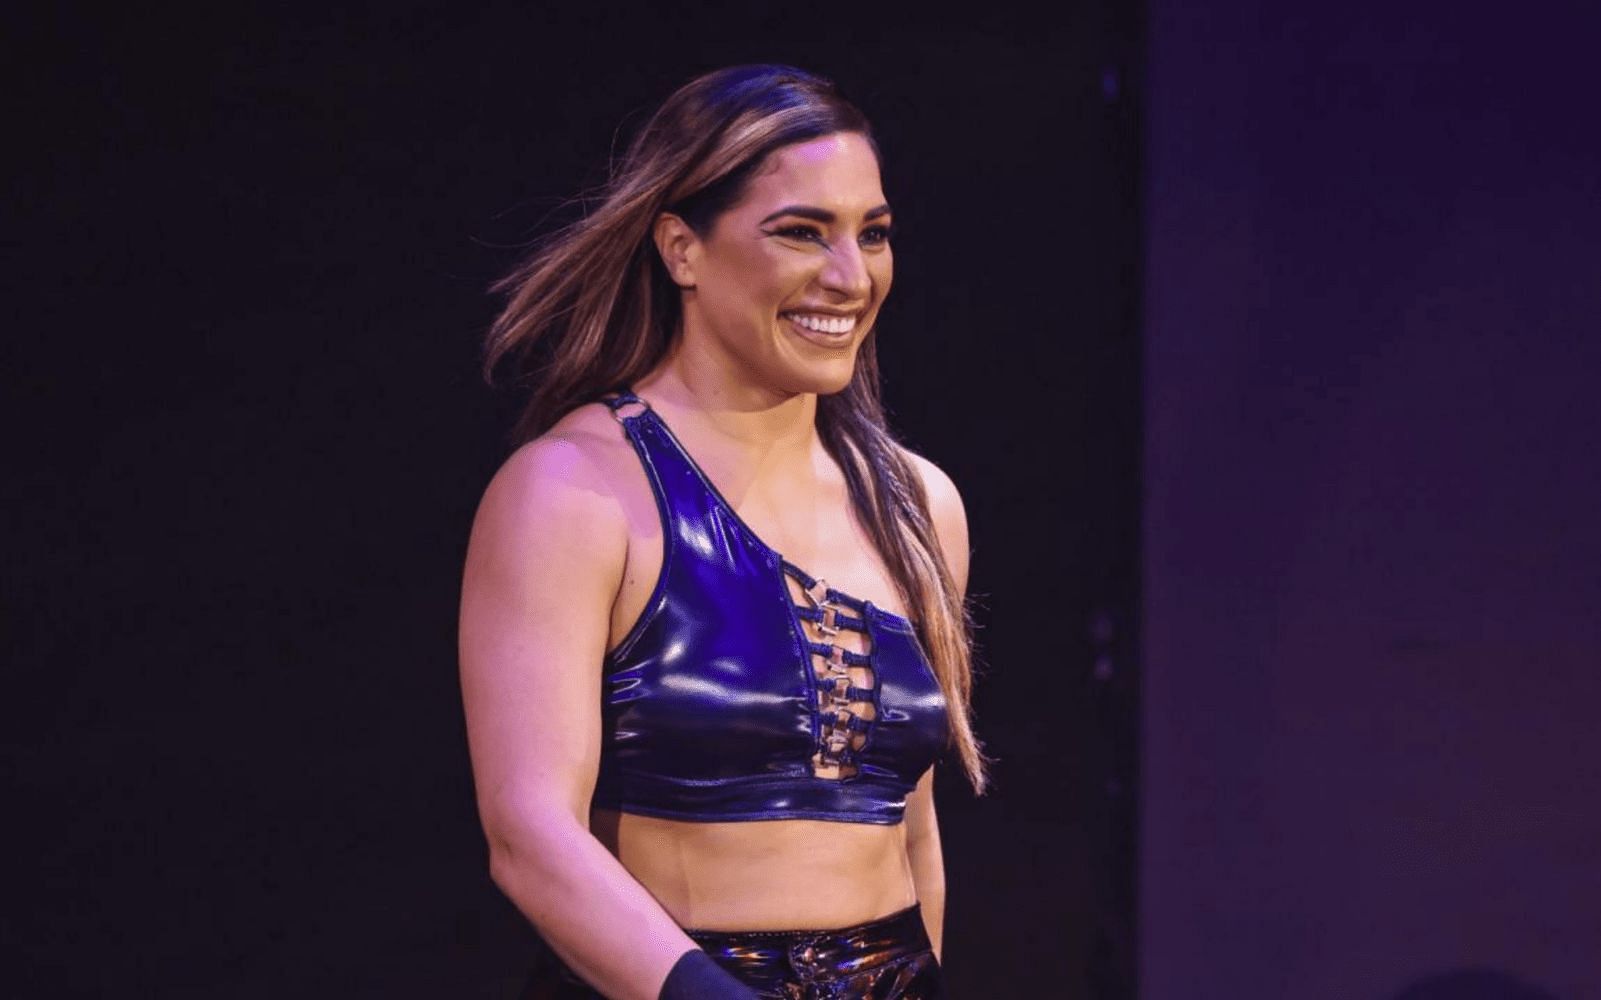 Rodriguez has made an impact in her short time on the main roster.